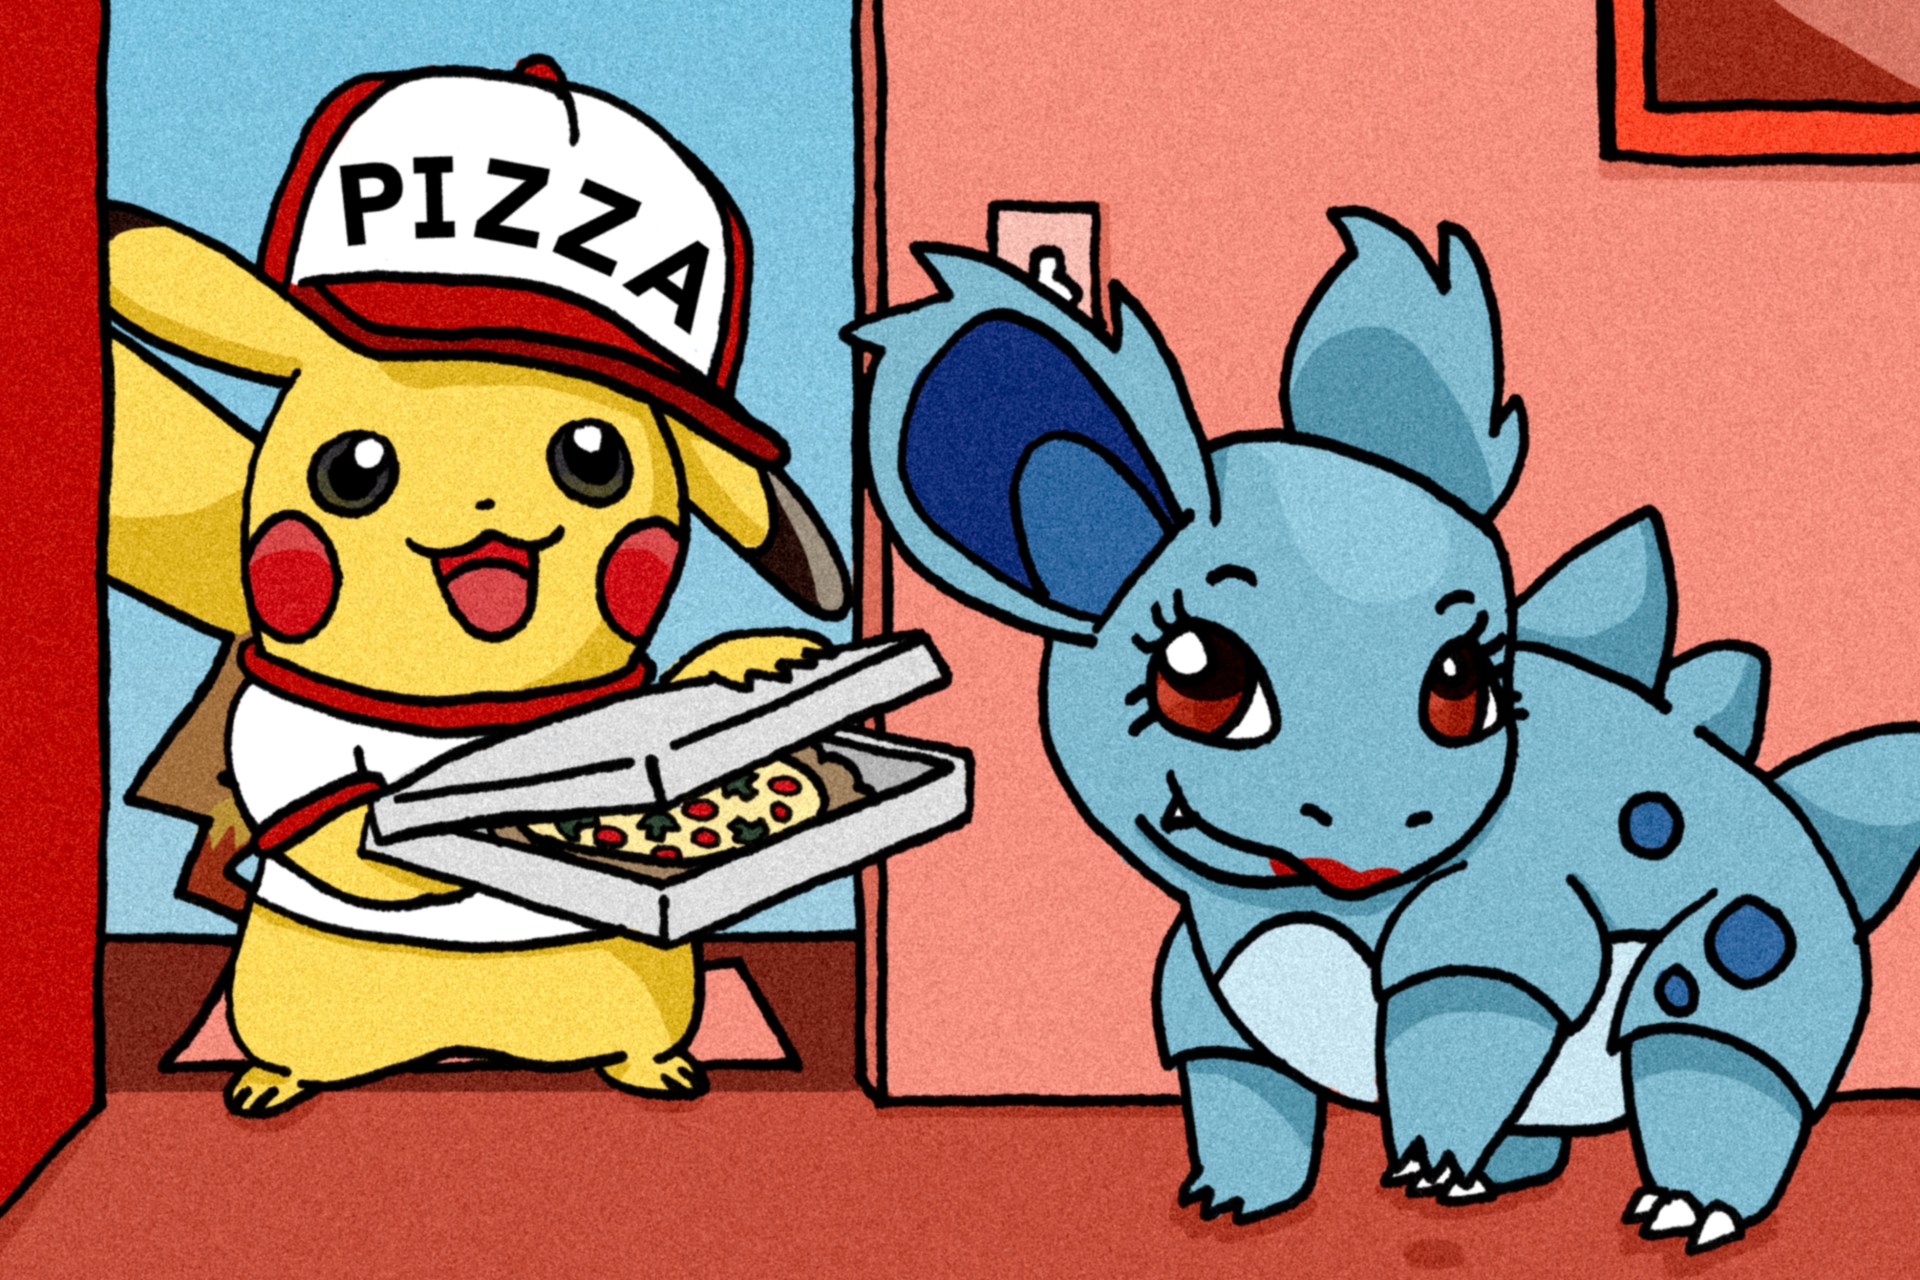 Pikachu - Pokemon Porn Is More Popular Than You Thought | Thought Catalog